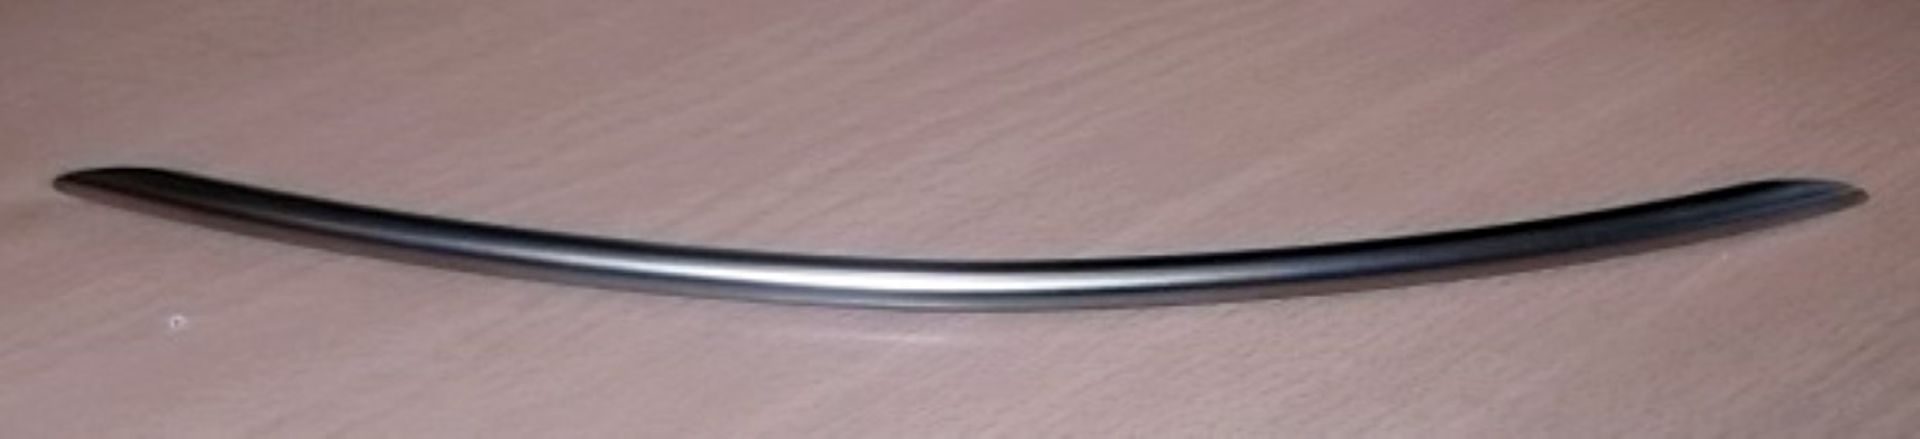 400 x BOW Handle Kitchen Door Handles By Crestwood - 320mm - New Stock - Brushed Nickel Finish - - Image 9 of 10